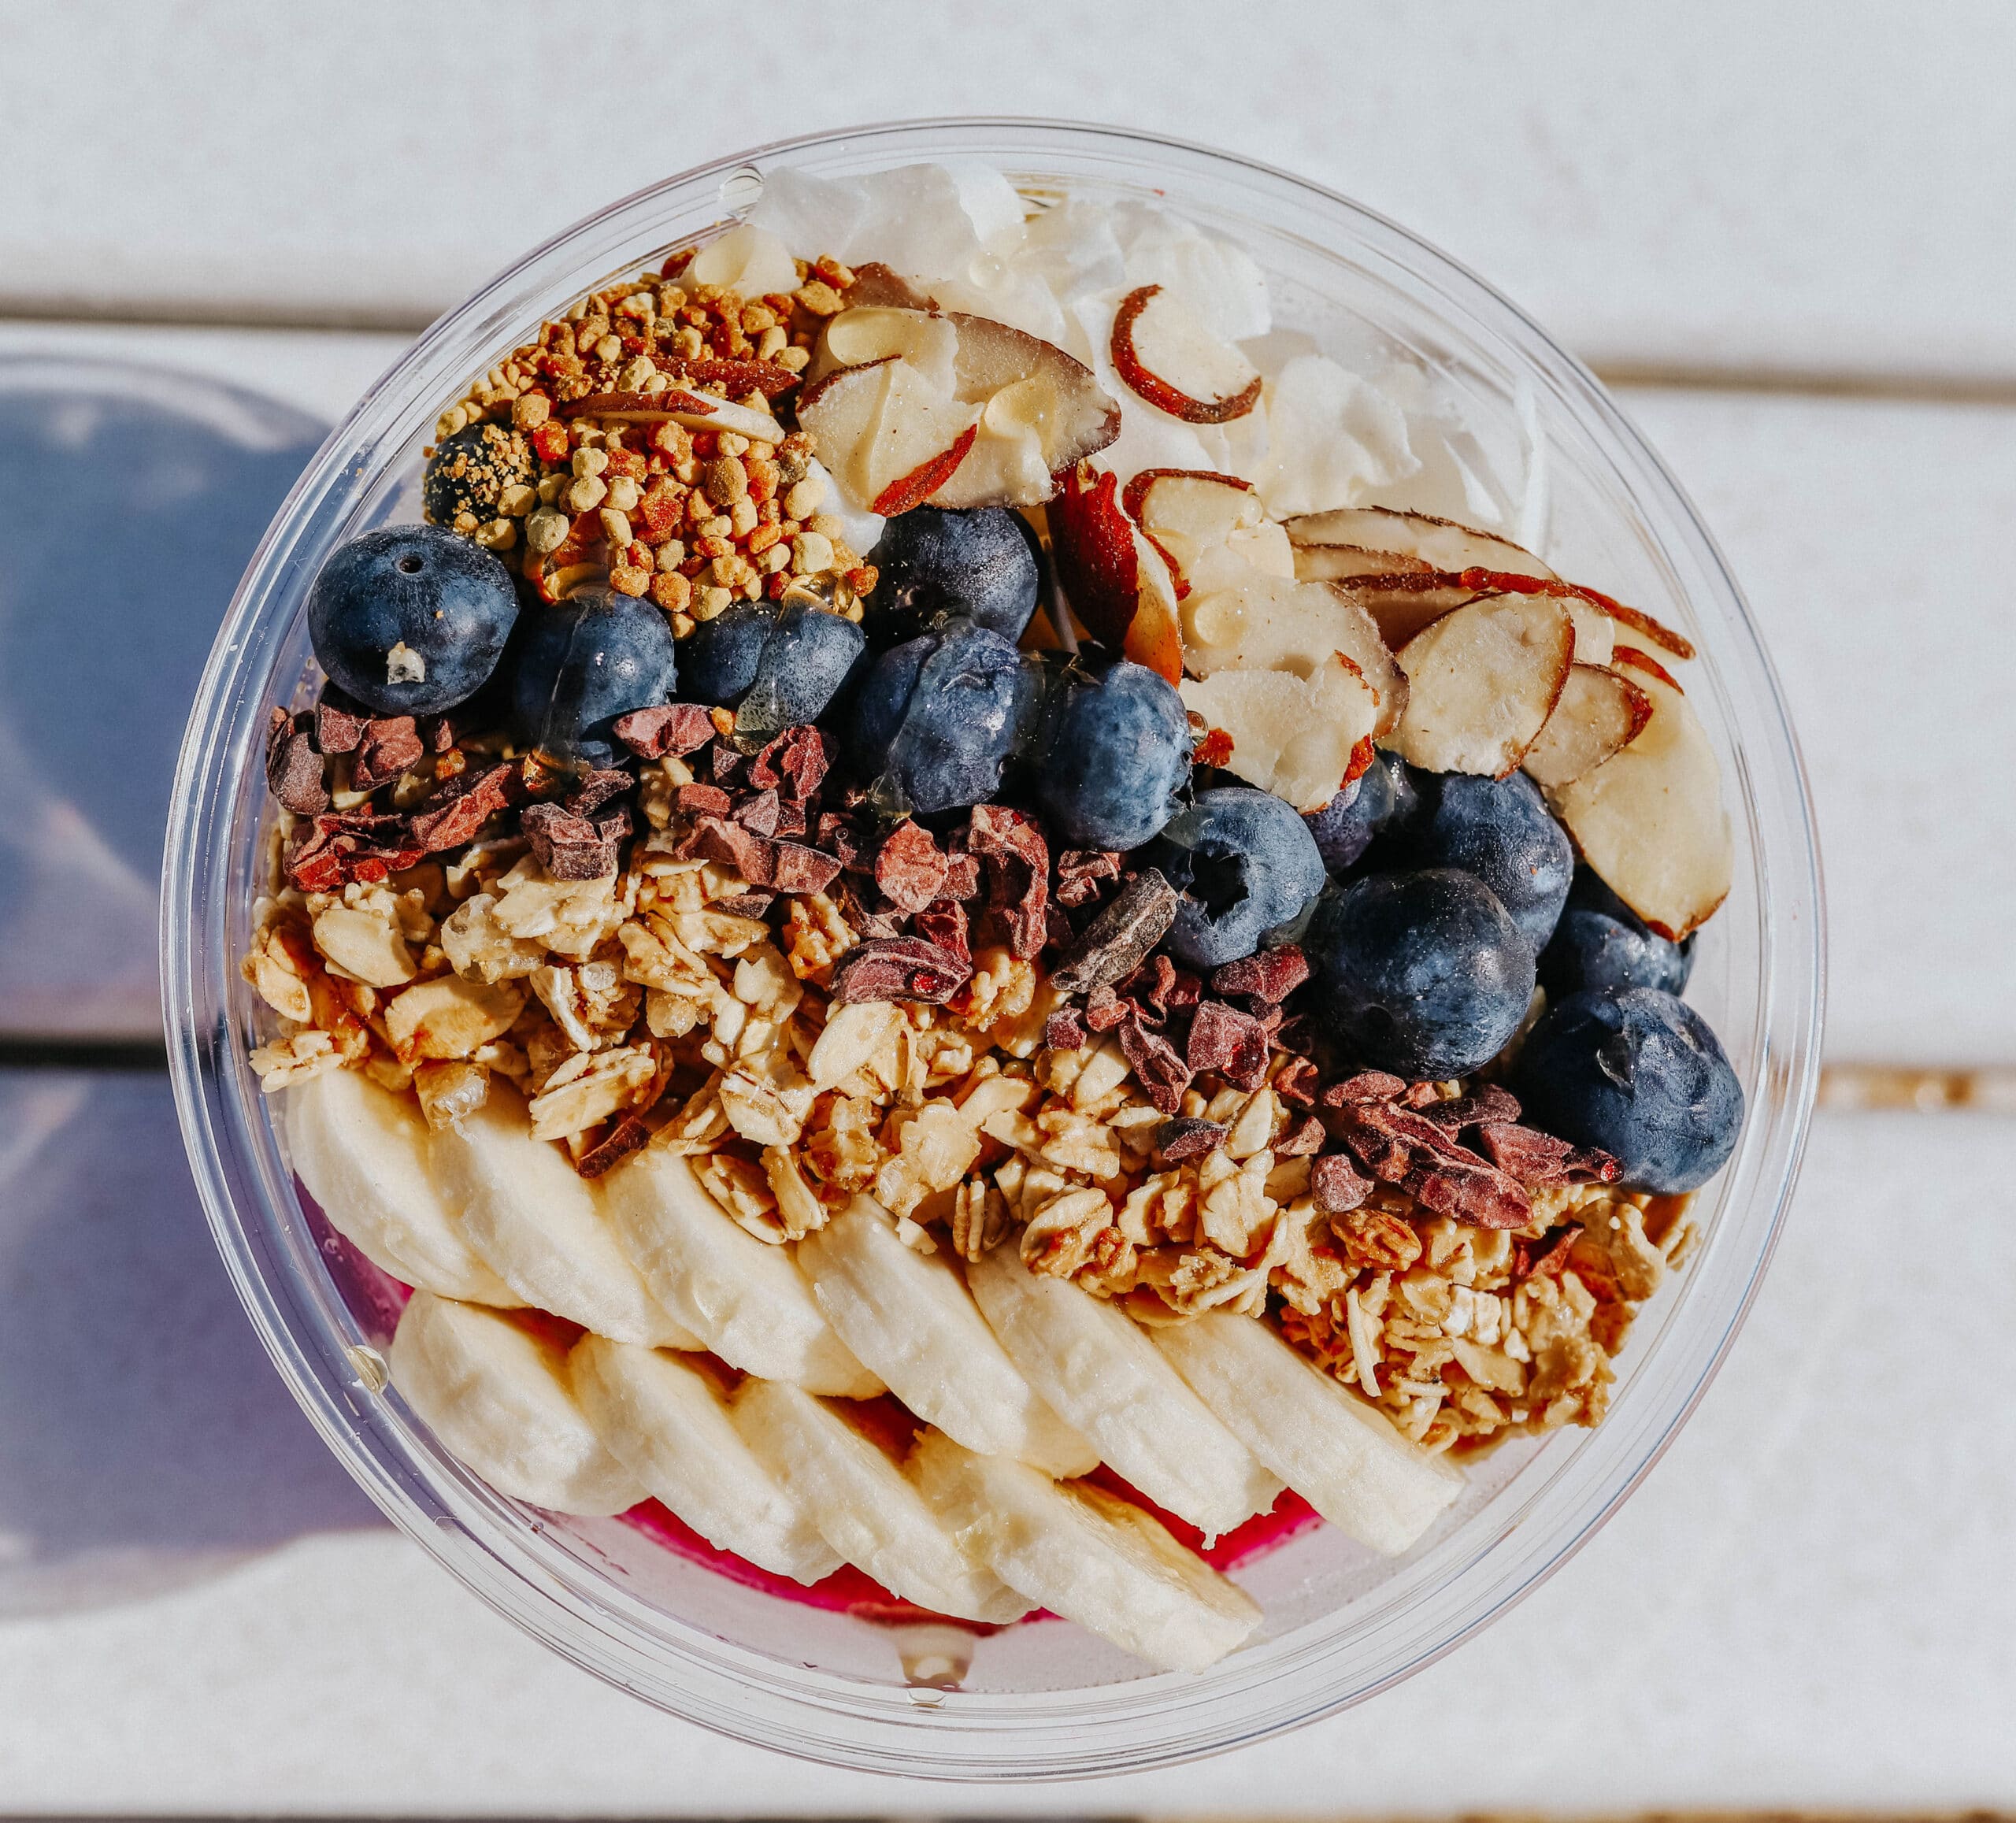 Green stream, juice, seaside, Florida, healthy living, delicious eats, bright colors, all natural, organic, açaí bowls, smoothies, toasts